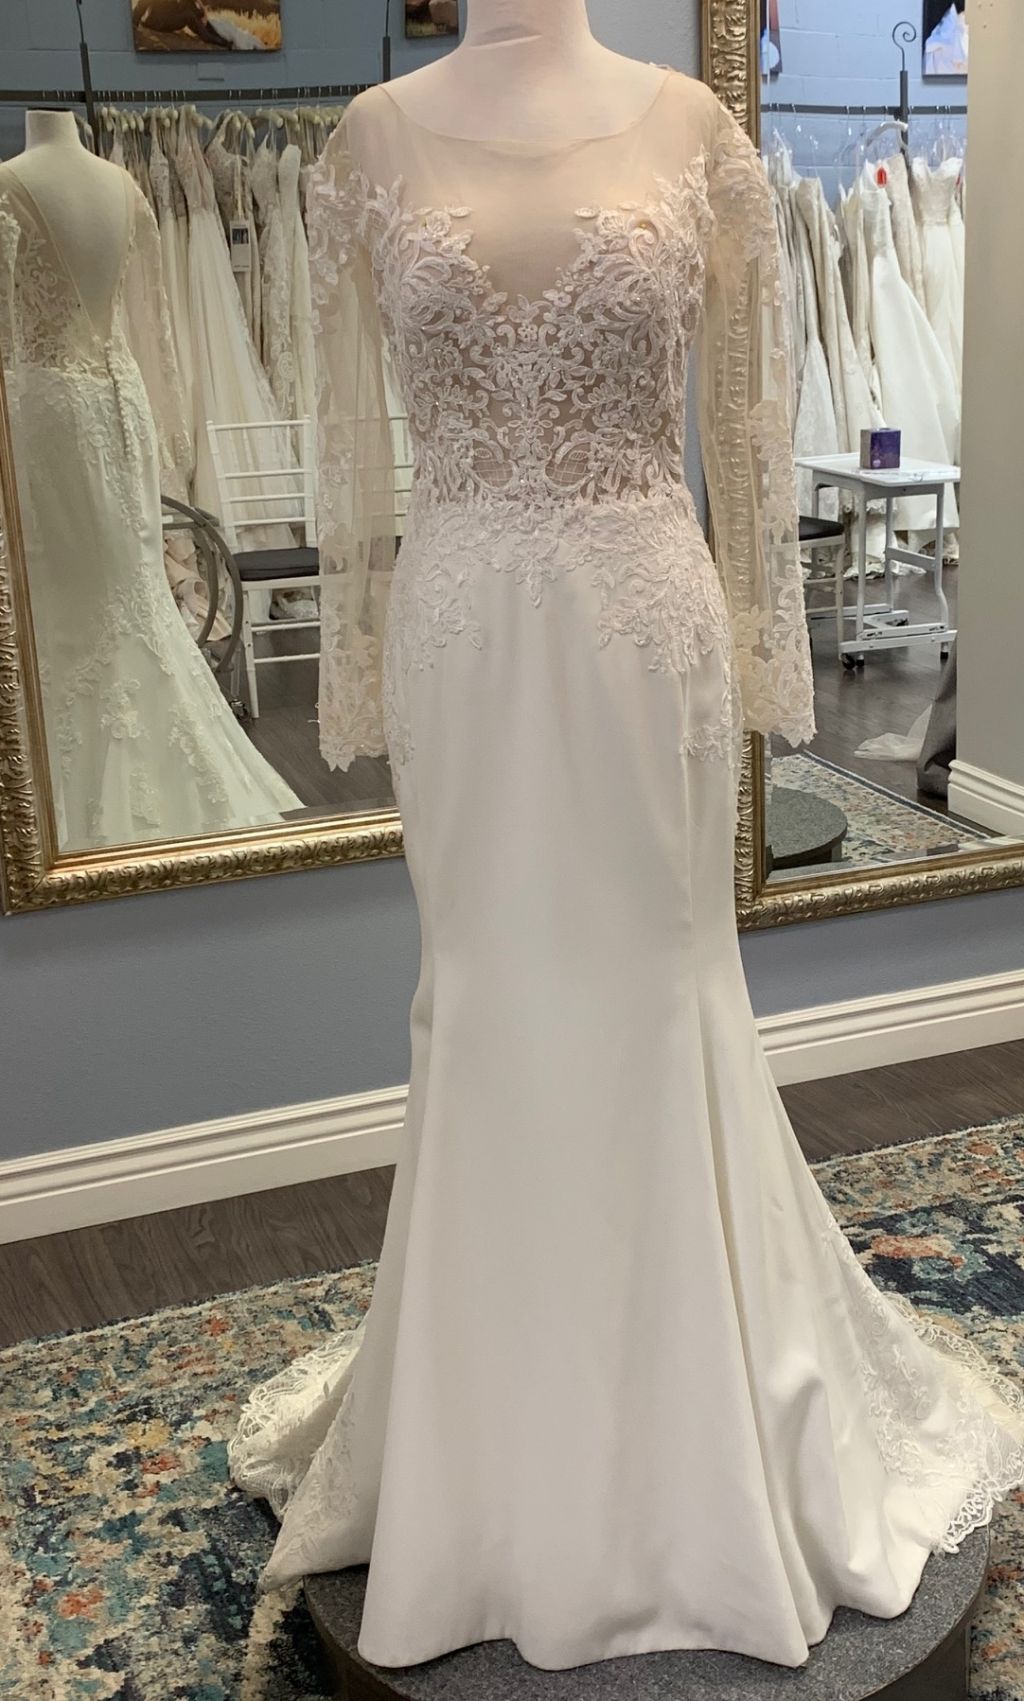 Maggie Sottero - Toccara Sample Gown